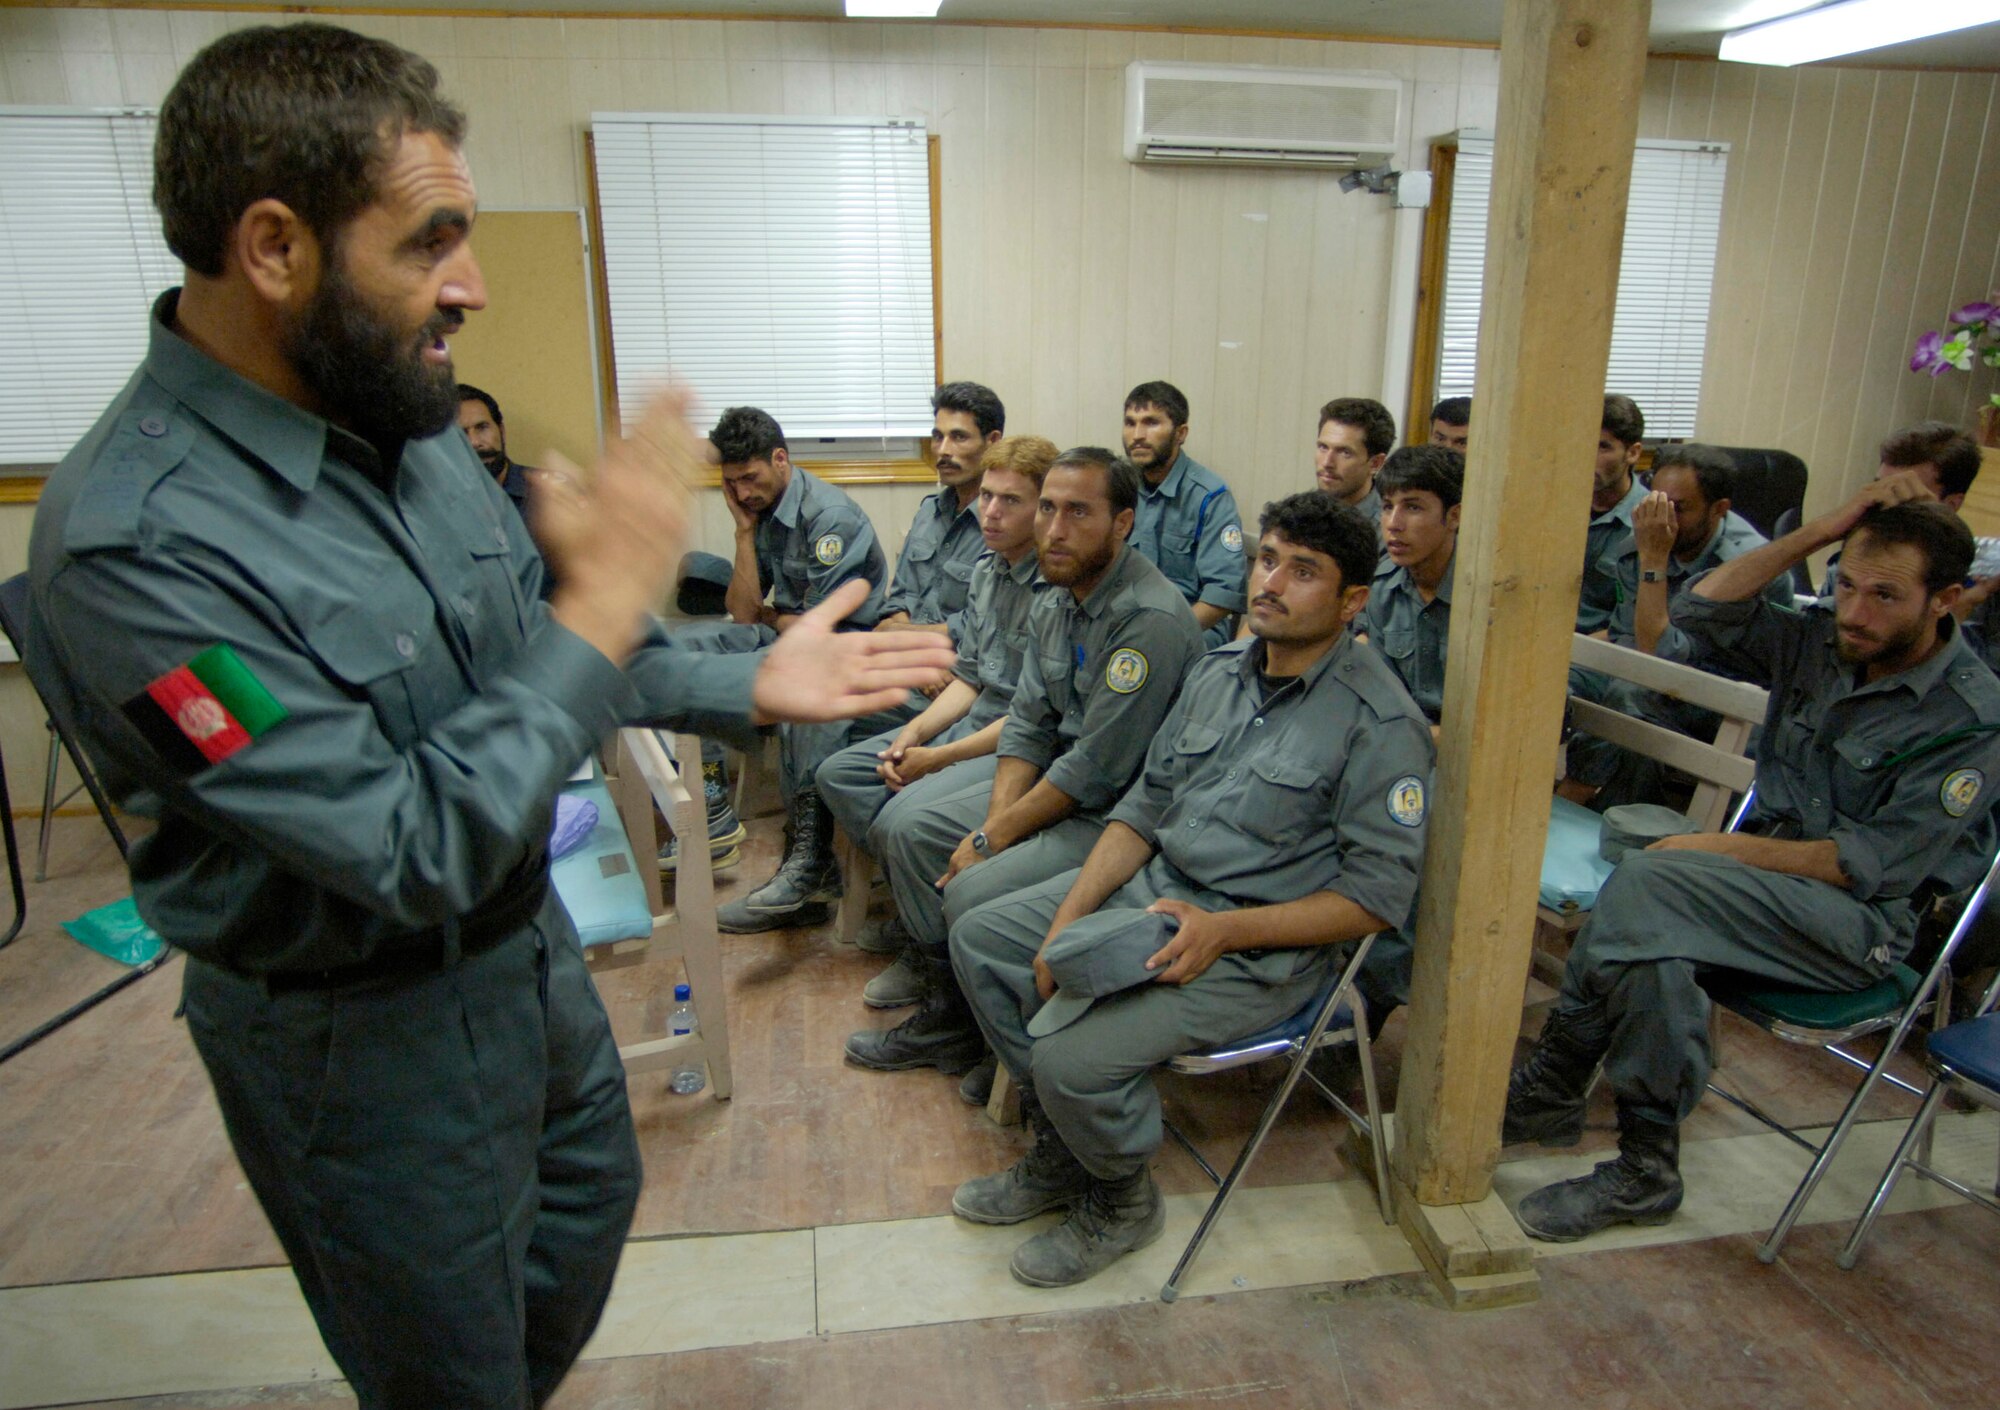 Afghan National Police Capt. Sanak teaches a class on the Afghanistan criminal code to Afghan National Auxiliary Police trainees Sept. 3. The trainees are attending a two-week ANAP sustainment course held on forward operating base Mehtar Lam in Afghanistan's Laghman province. The course is being taught for the first time entirely by ANP instructors. Previously, all ANP instruction was conducted by a police technical advisory team made up of U.S. Air Force security forces Airmen assigned to the Laghman Provincial Reconstruction Team. The PTAT's role has now shifted to monitoring the course's progress and mentoring the ANP instructors. The two-week course is required in order for auxiliary members to become full-fledged ANP officers. The course was written by PTAT members and approved by the Afghan interior ministry. Laghman is the first Afghanistan province to have Afghan instructors teaching an ANP course. The ANP instructors are competitively selected and must complete an instructor development course taught at a regional training center. (U.S. Air Force photo/Master Sgt. Jim Varhegyi)